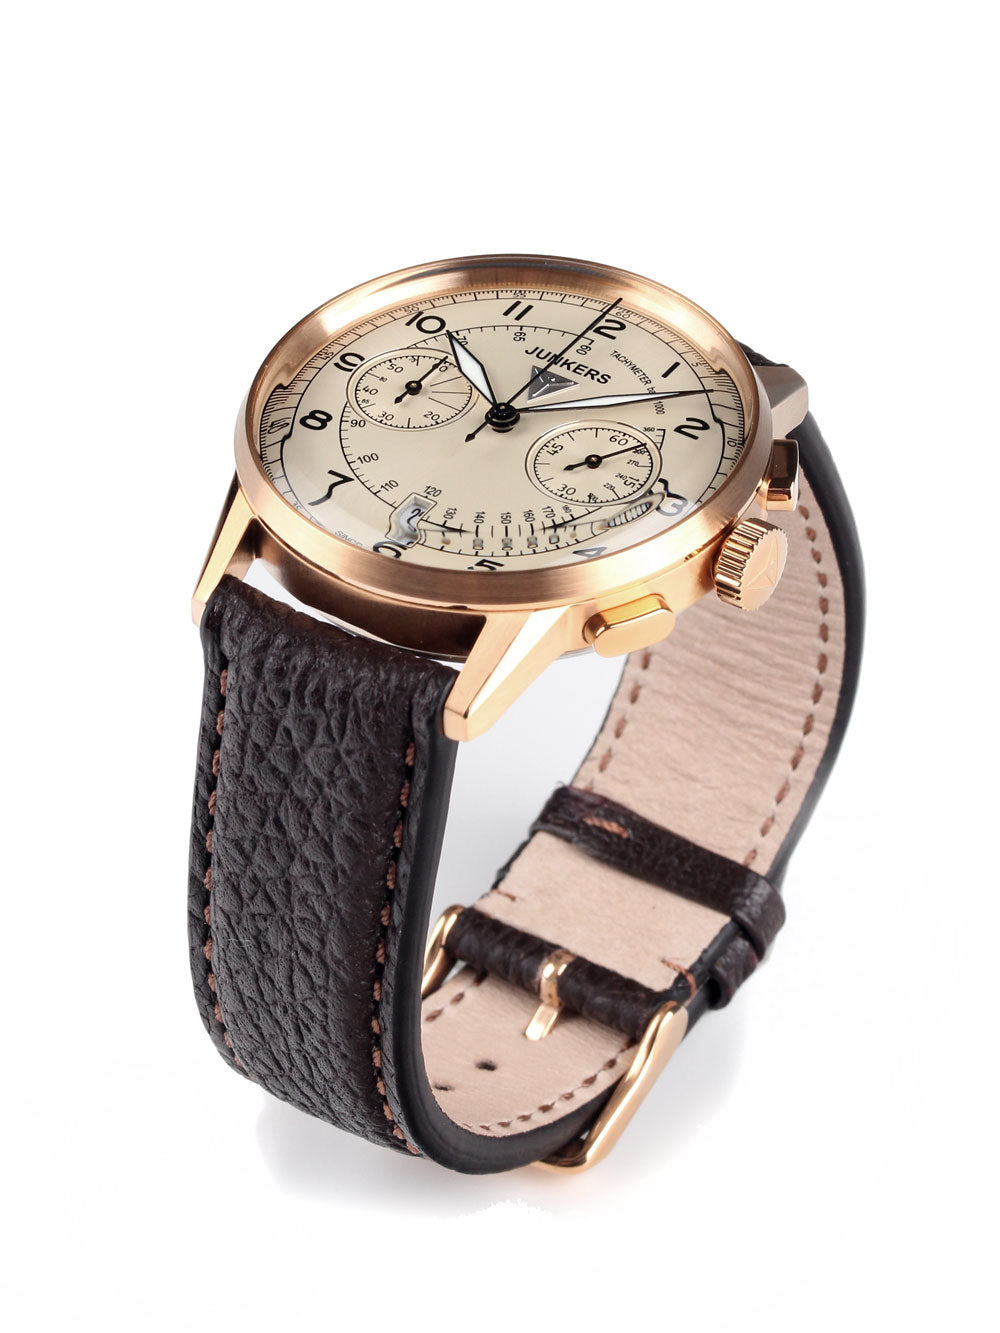 Junkers G38 6972-1 Chronograph golden brown 42 mm 100M